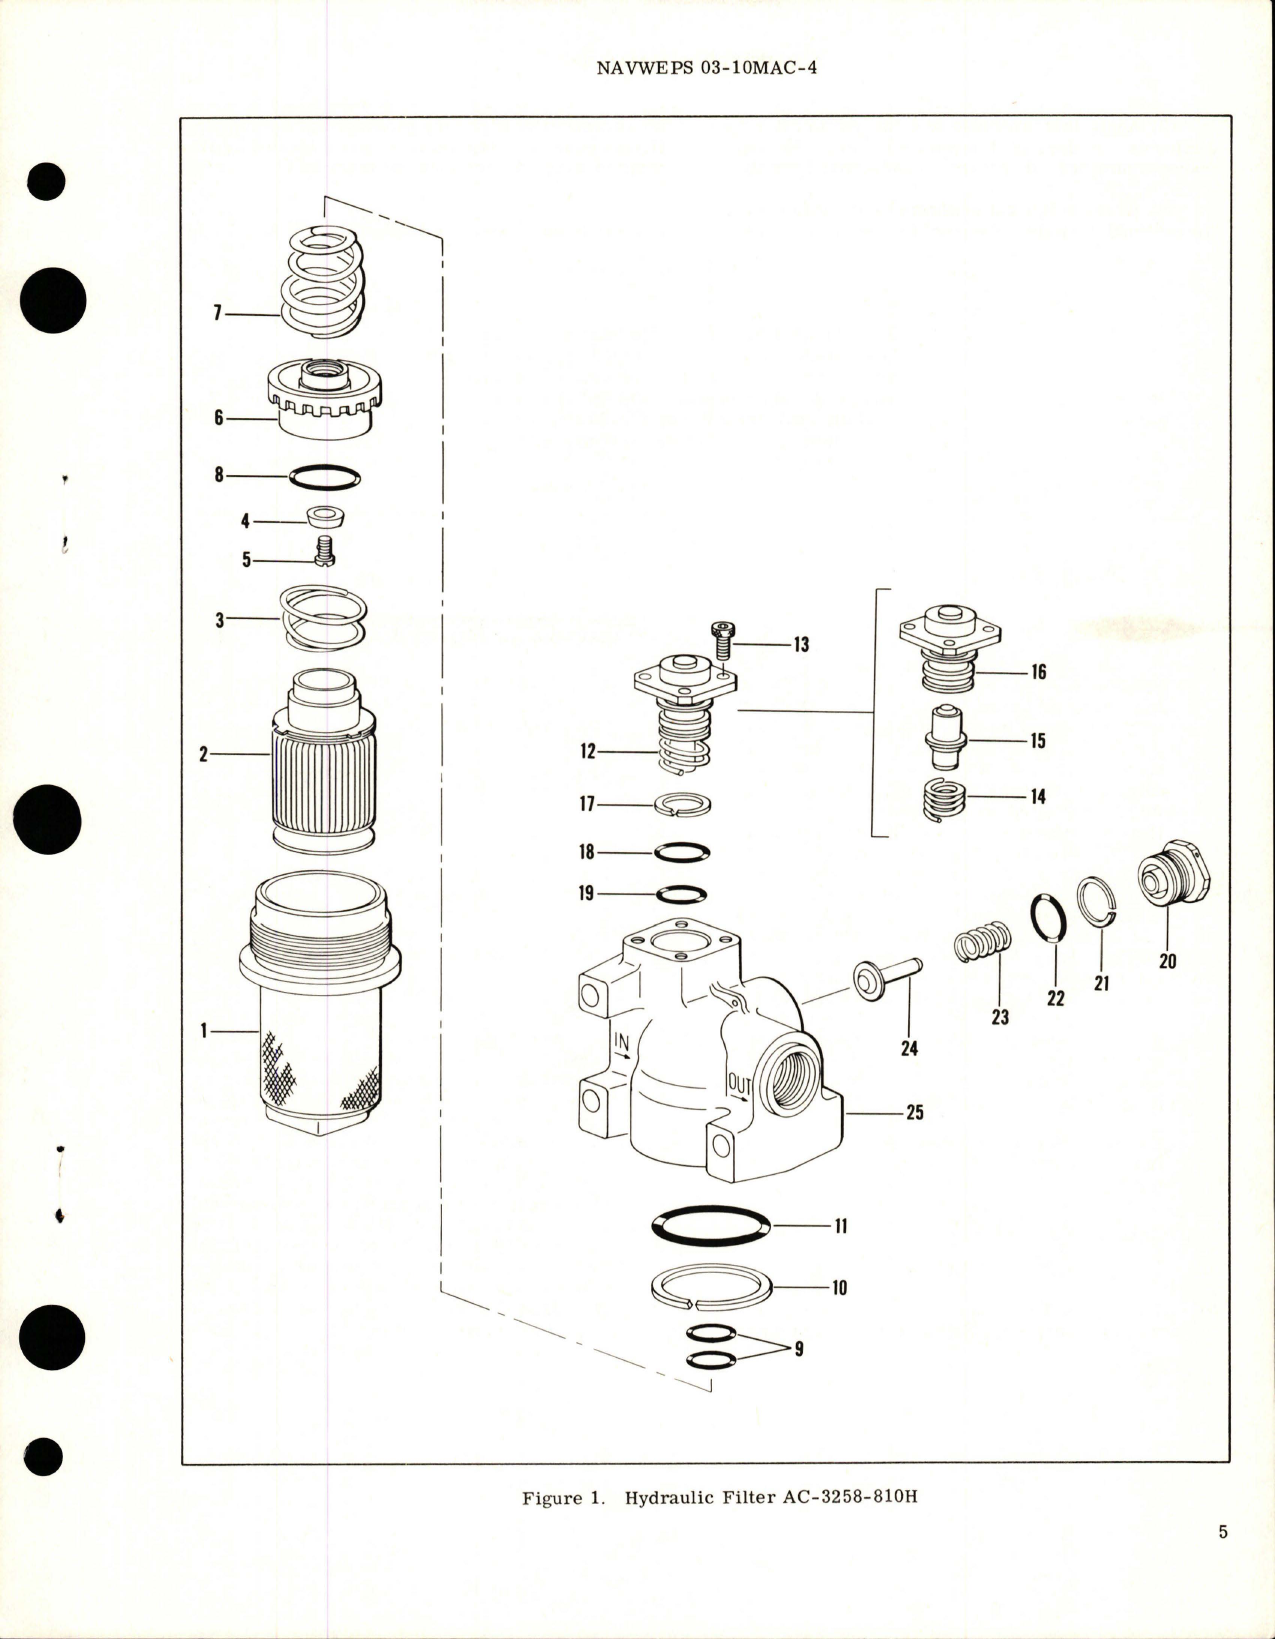 Sample page 5 from AirCorps Library document: Overhaul Instructions with Parts Breakdown for Hydraulic Filter - Part AC-3258-810H 